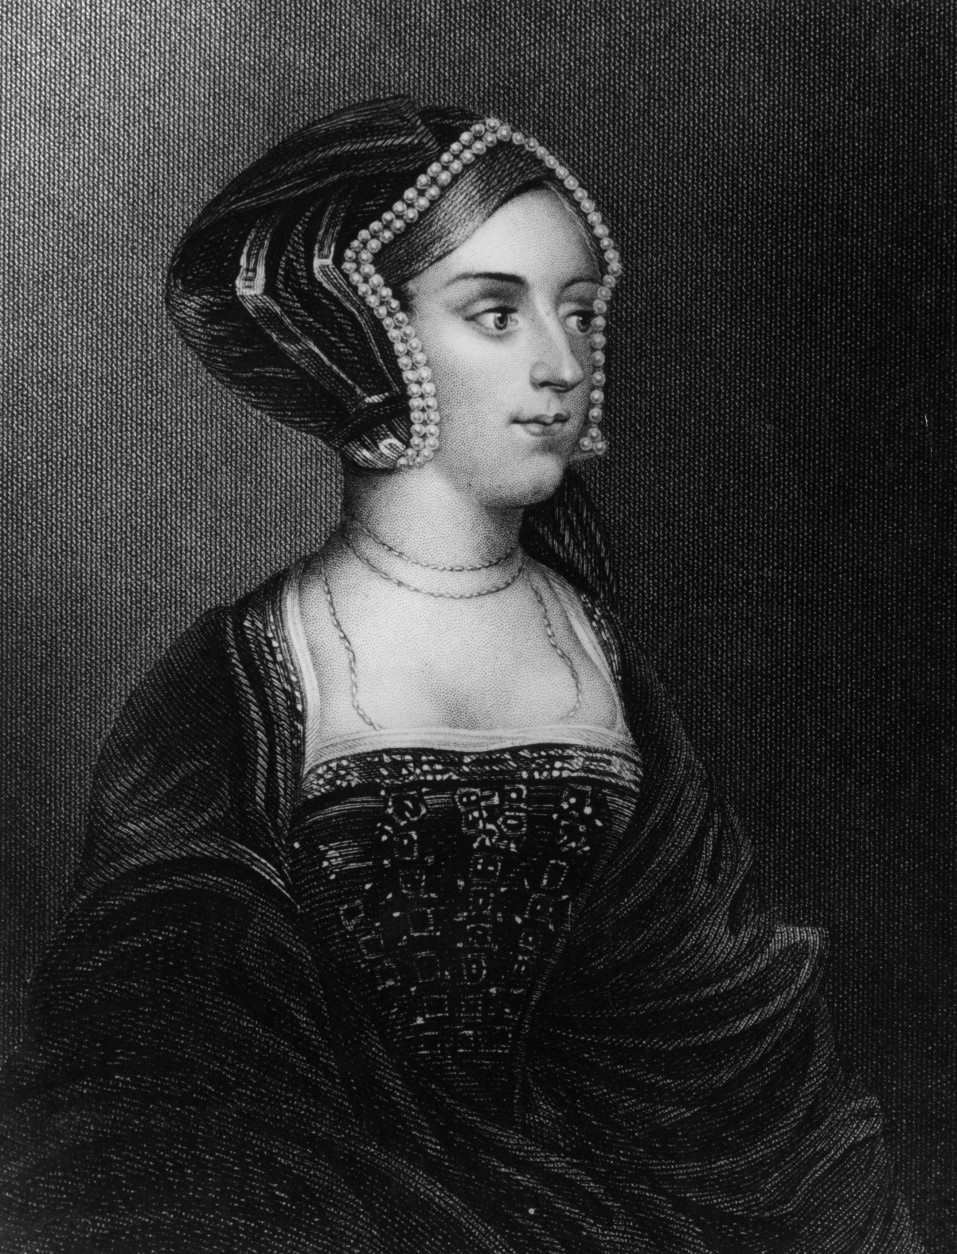 Circa 1530, Anne Boleyn (1507 - 1536), wife of King Henry VIII of England. (Photo by Hulton Archive/Getty Images)